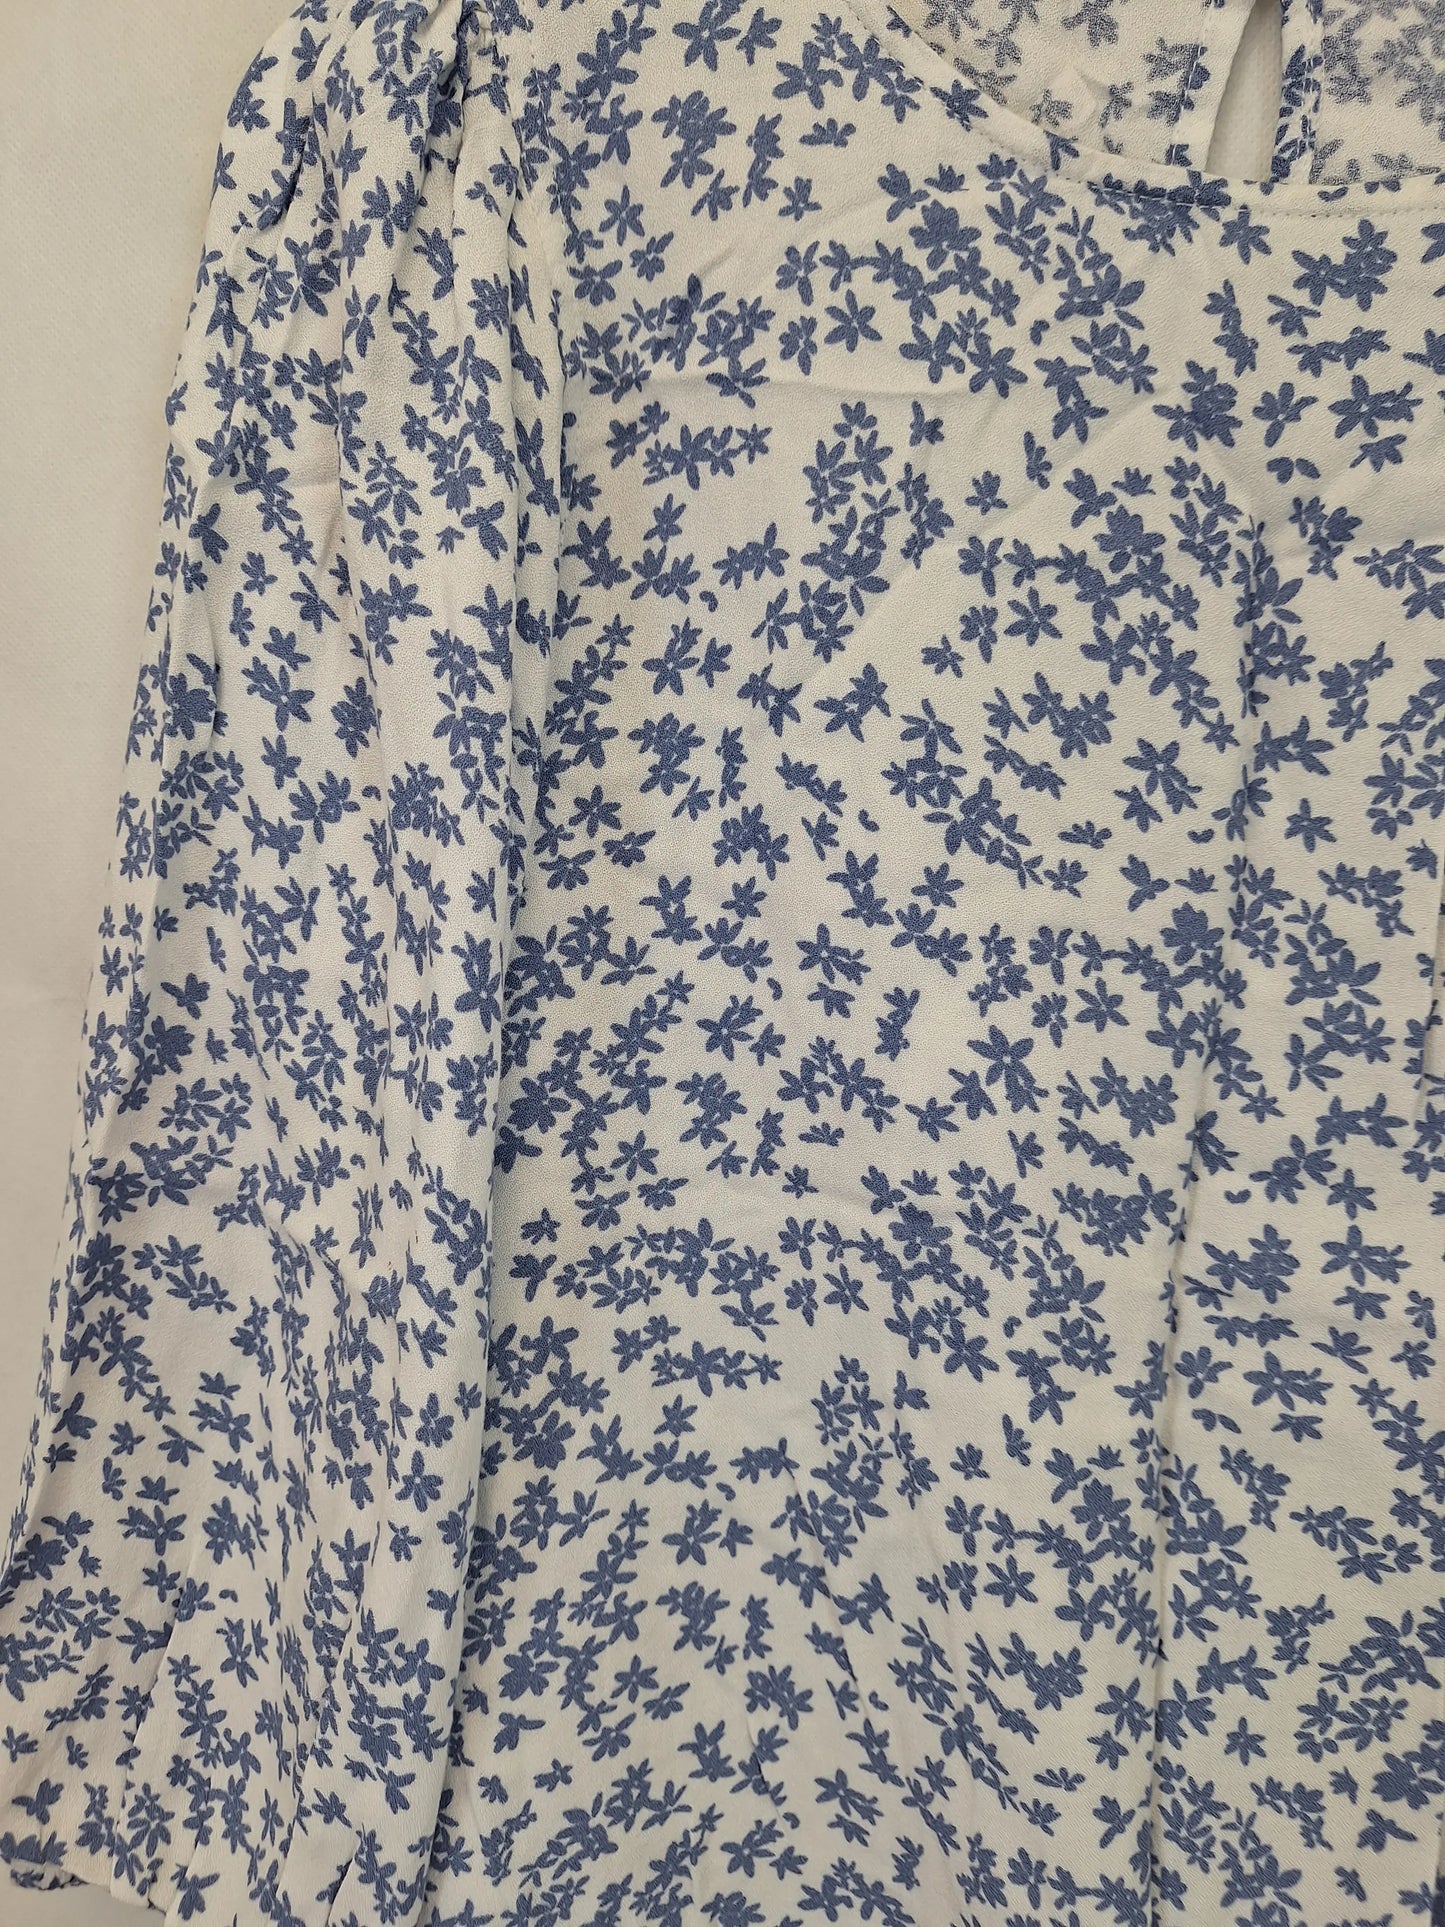 Ceres Spring Blossom Top Size S by SwapUp-Online Second Hand Store-Online Thrift Store